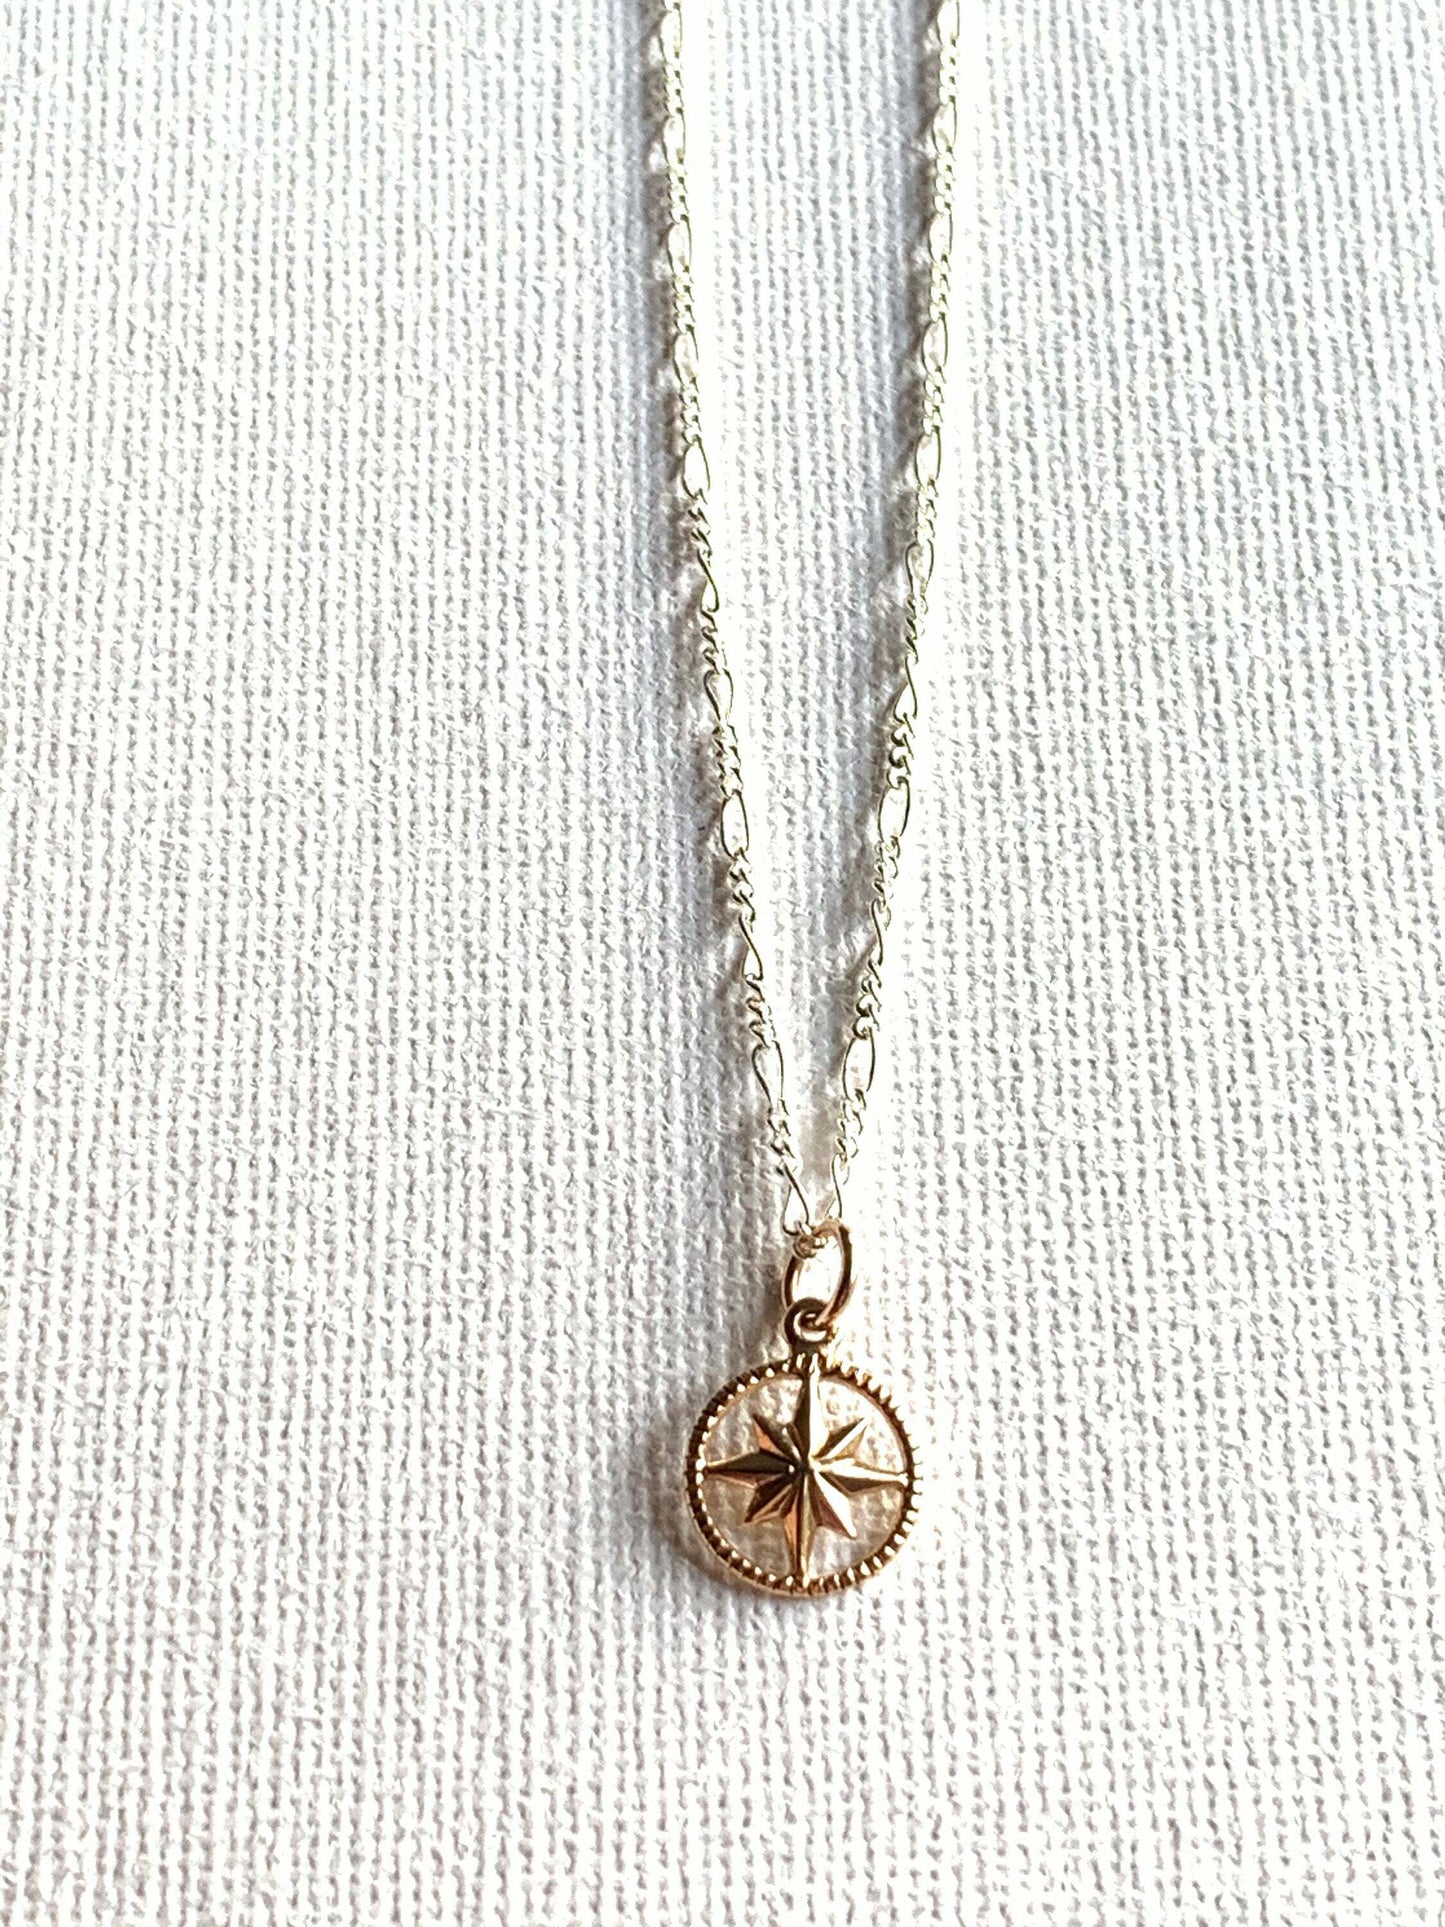 Compass Rose Charm Necklace